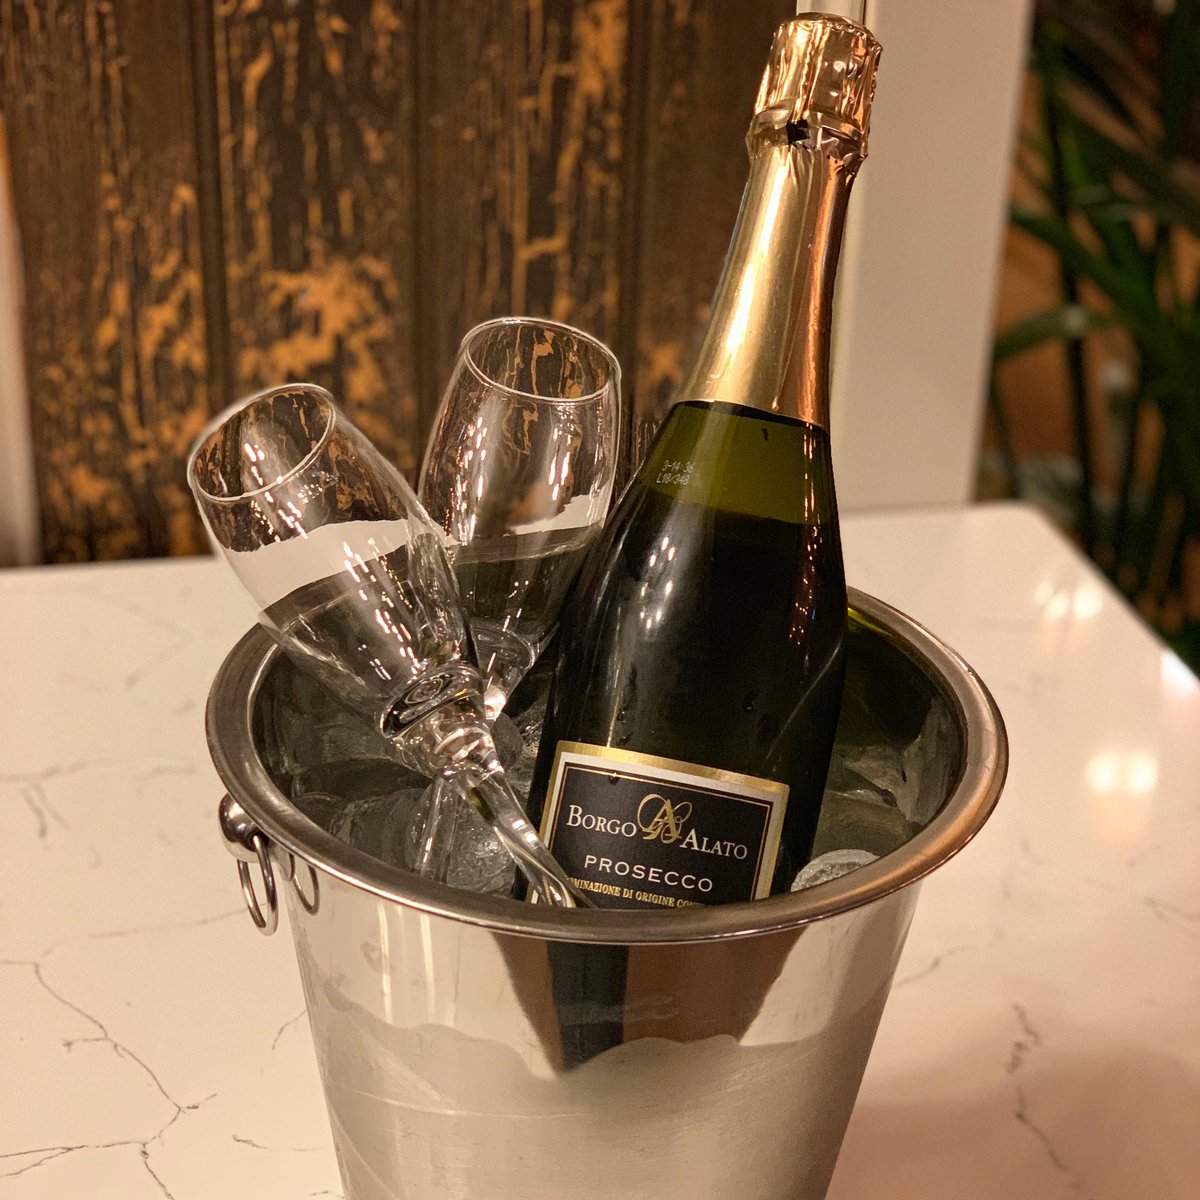 Find an excuse to celebrate and get a bottle of Prosecco for only £15 all day today at The Parrs Wood! 🍾

#FizzFriday #Didsbury #Manchester